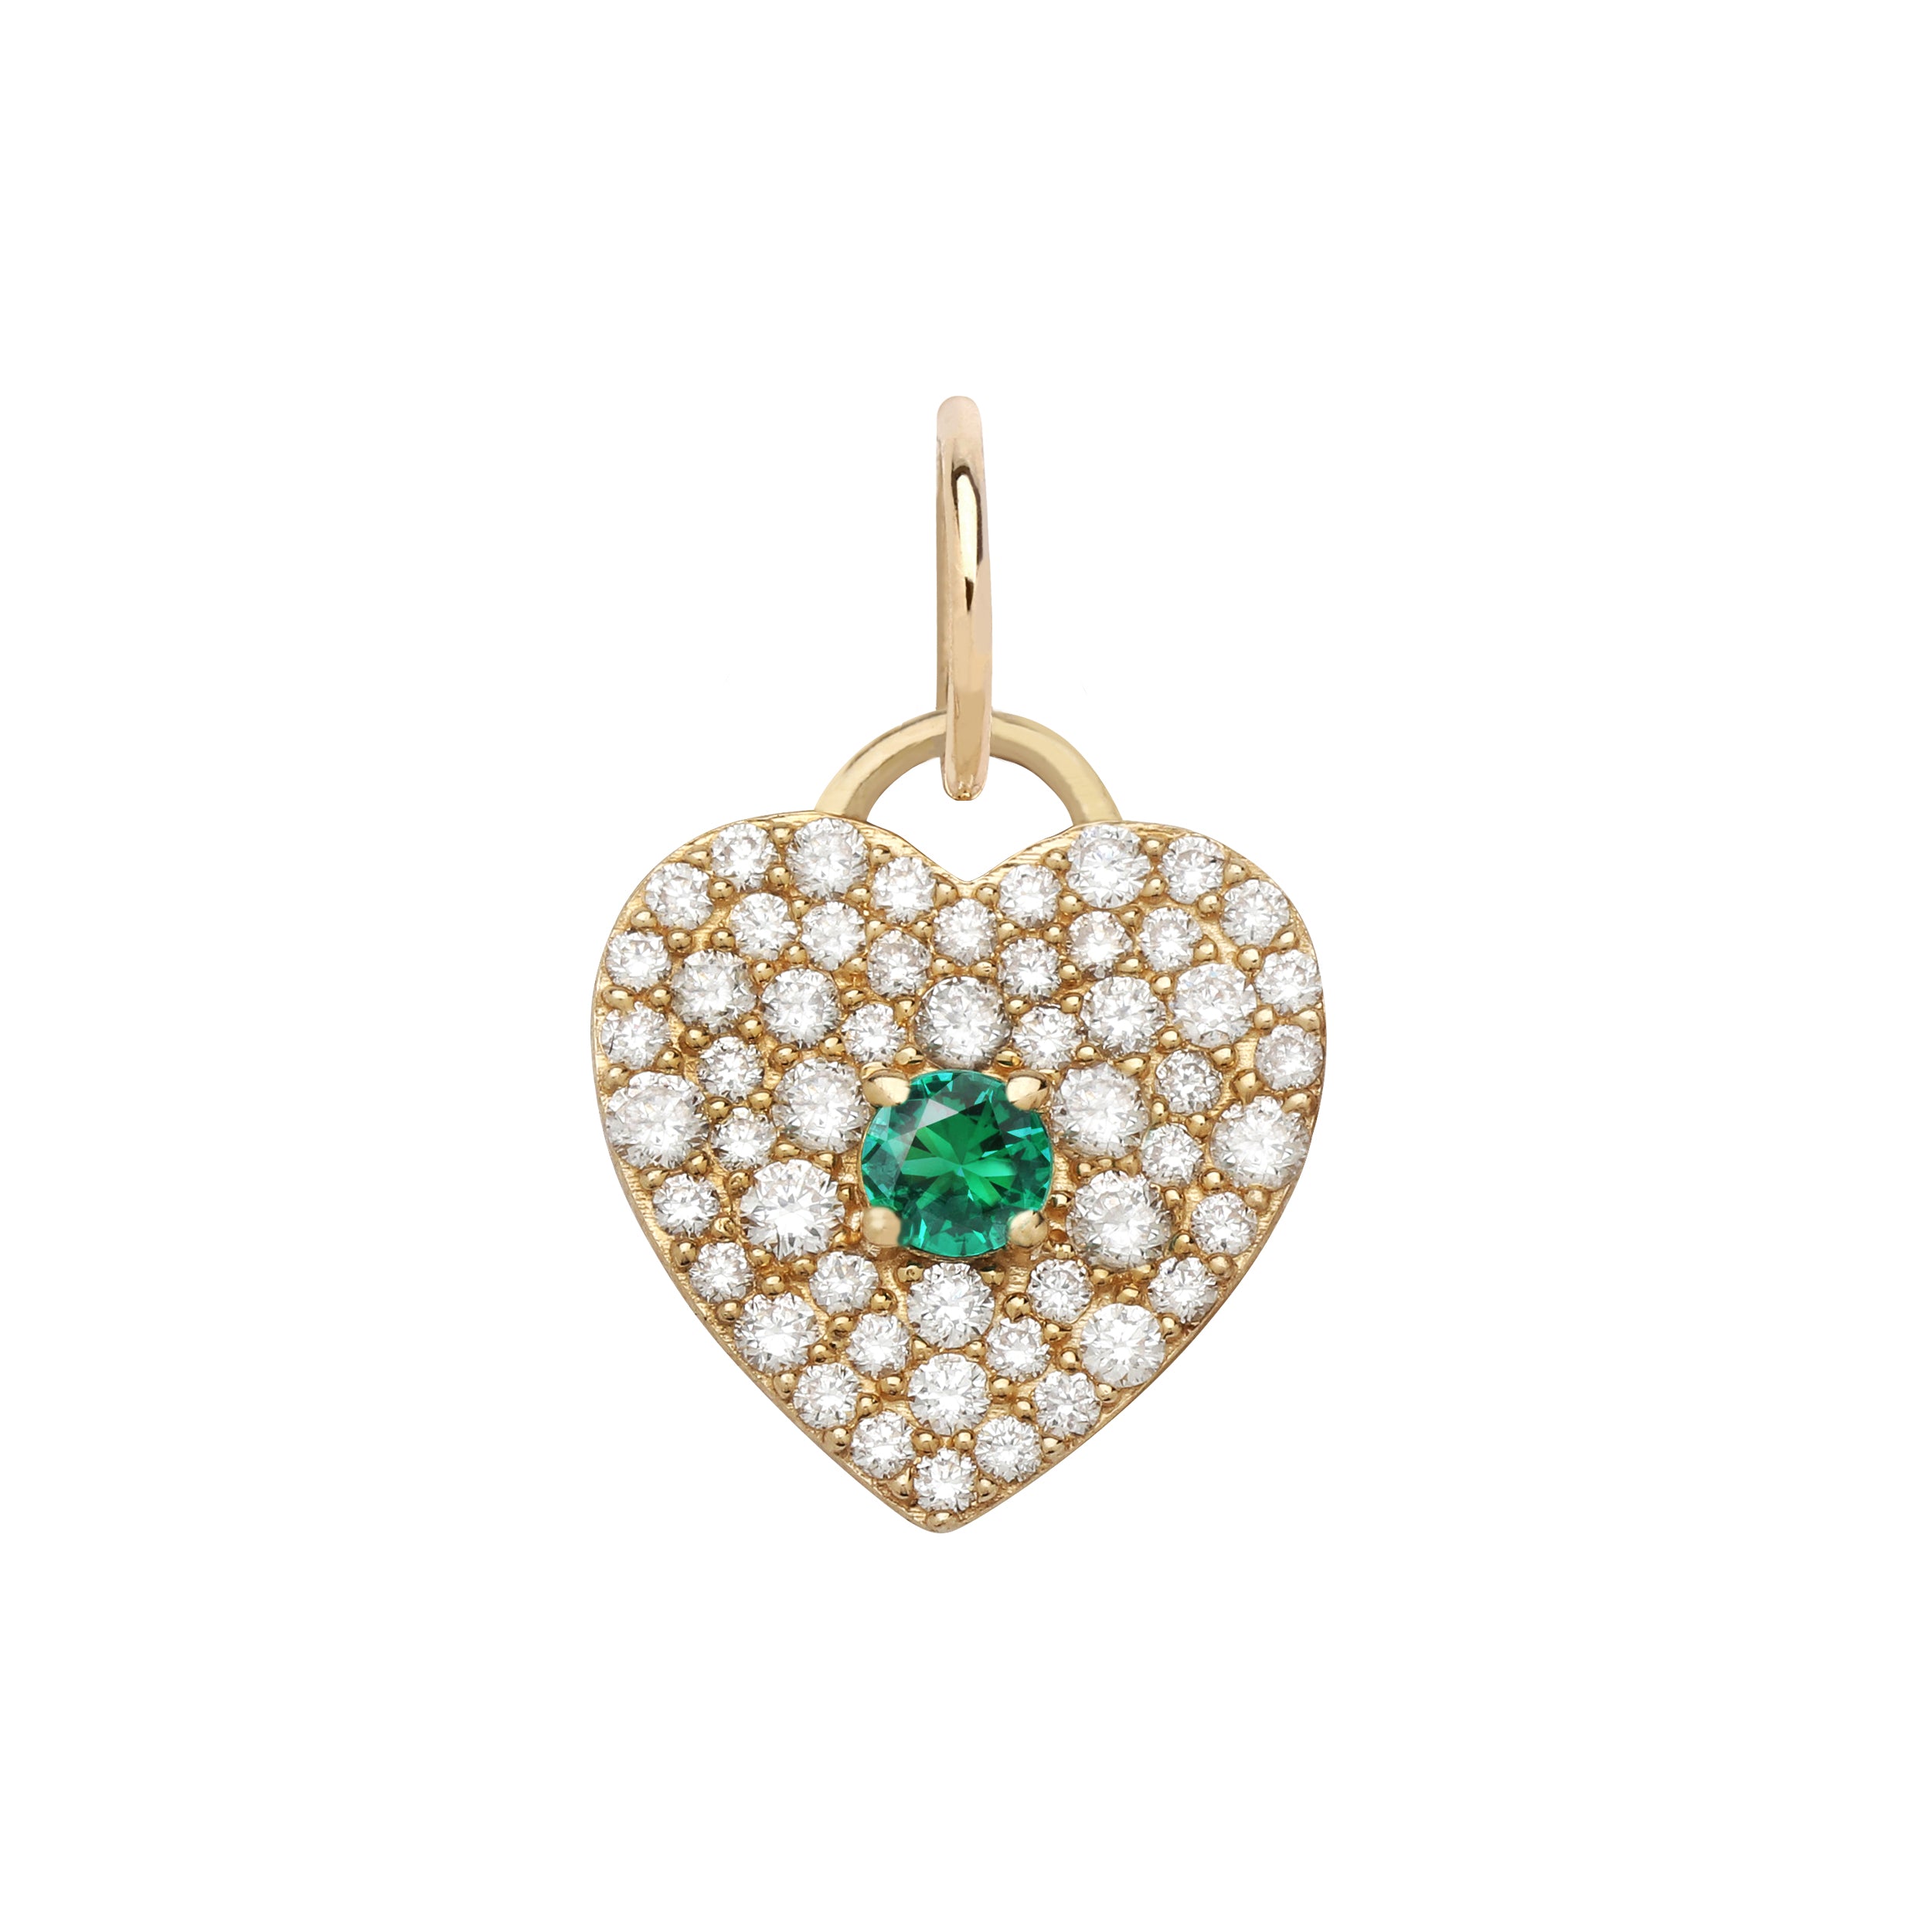 All Diamond Heart with Emerald Accent